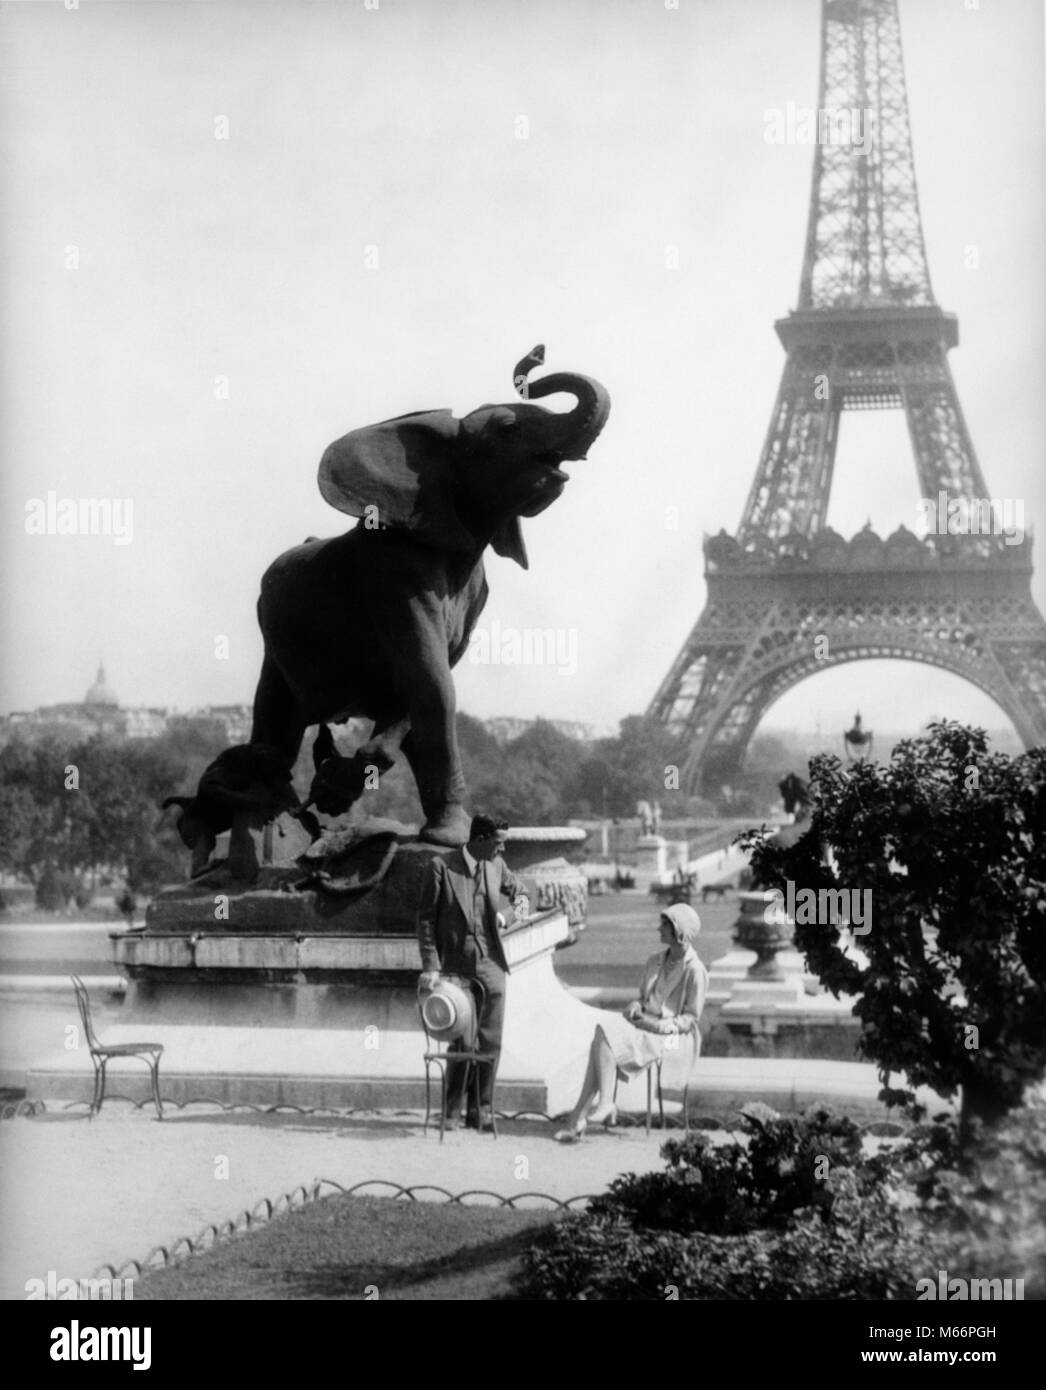 1920s COUPLE MAN WOMAN ELEPHANT STATUE GARDEN OF TROCADERO WITH EIFFEL TOWER IN BACKGROUND PARIS FRANCE - r4347 HAR001 HARS HUSBANDS LUXURY COPY SPACE FRIENDSHIP LADIES ANIMALS COUPLES NOSTALGIA EUROPE TOGETHERNESS 20-25 YEARS 25-30 YEARS 30-35 YEARS EIFFEL TOWER WIVES ADVENTURE CAPITOL EUROPEAN STYLES TOURIST RELATIONSHIPS CAPITAL FASHIONS CITIES MALES MID-ADULT MID-ADULT MAN MID-ADULT WOMAN B&W BLACK AND WHITE OLD FASHIONED PERSONS TROCADERO Stock Photo